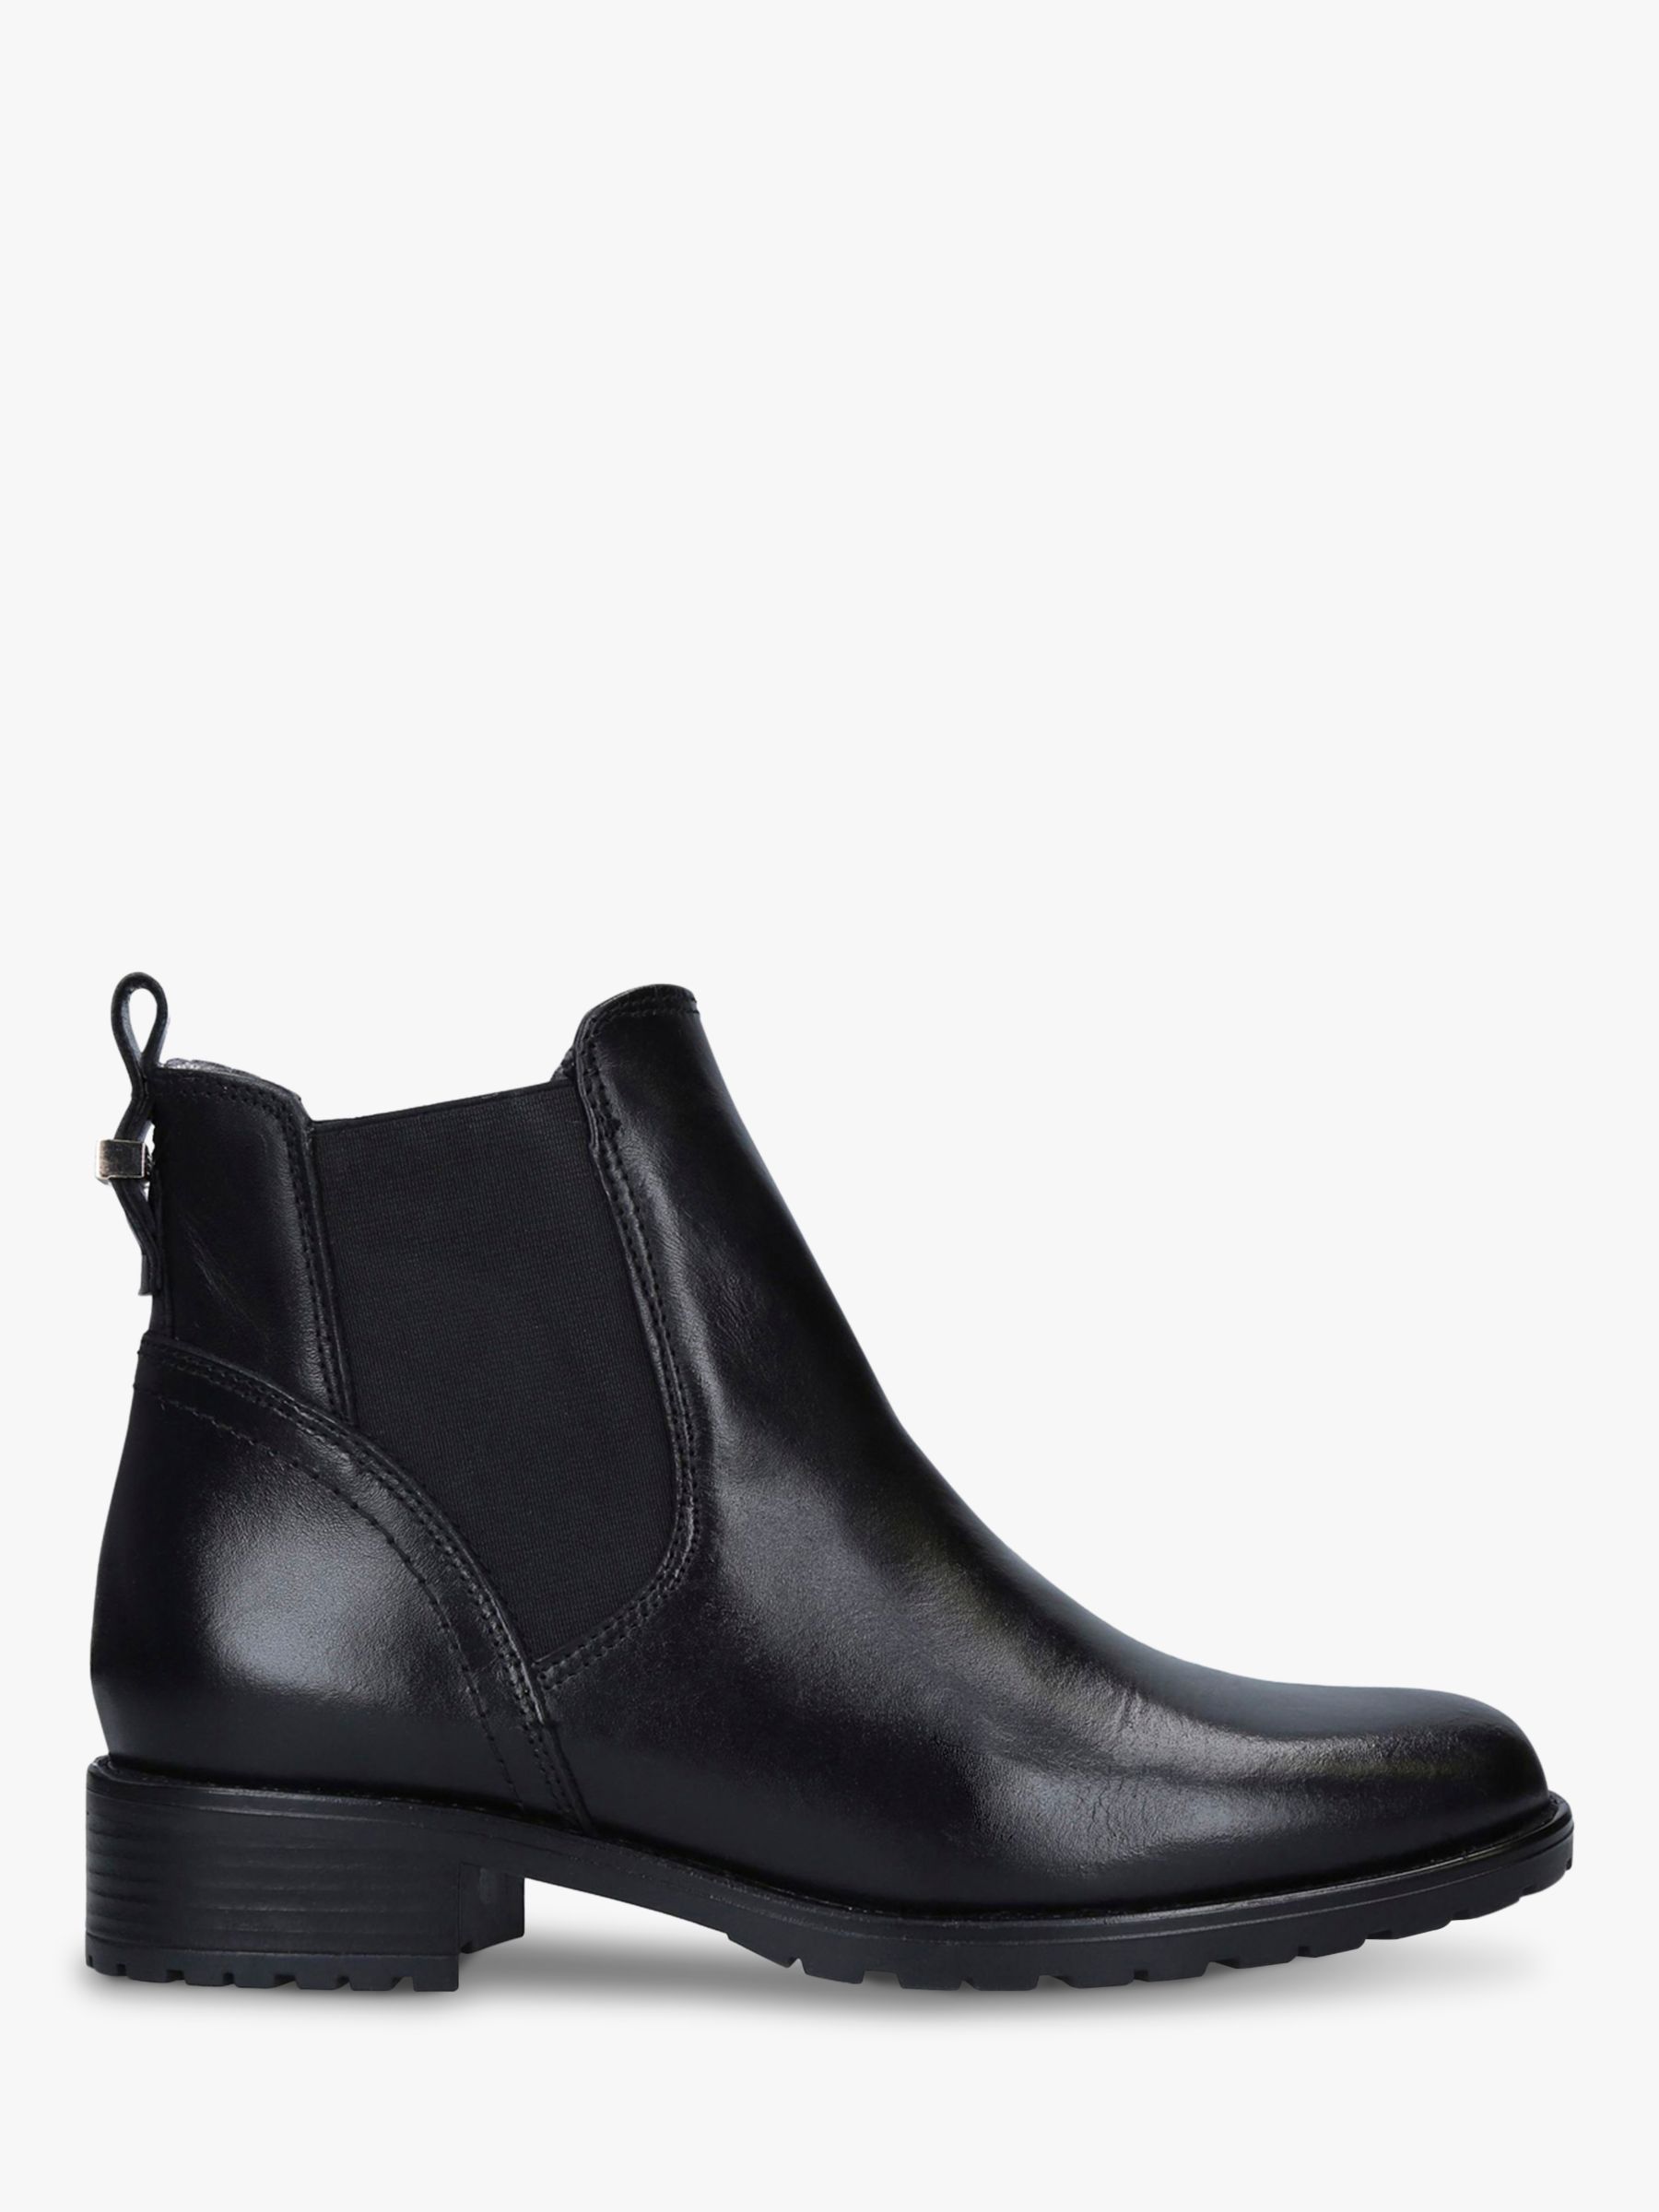 womens black chelsea ankle boots